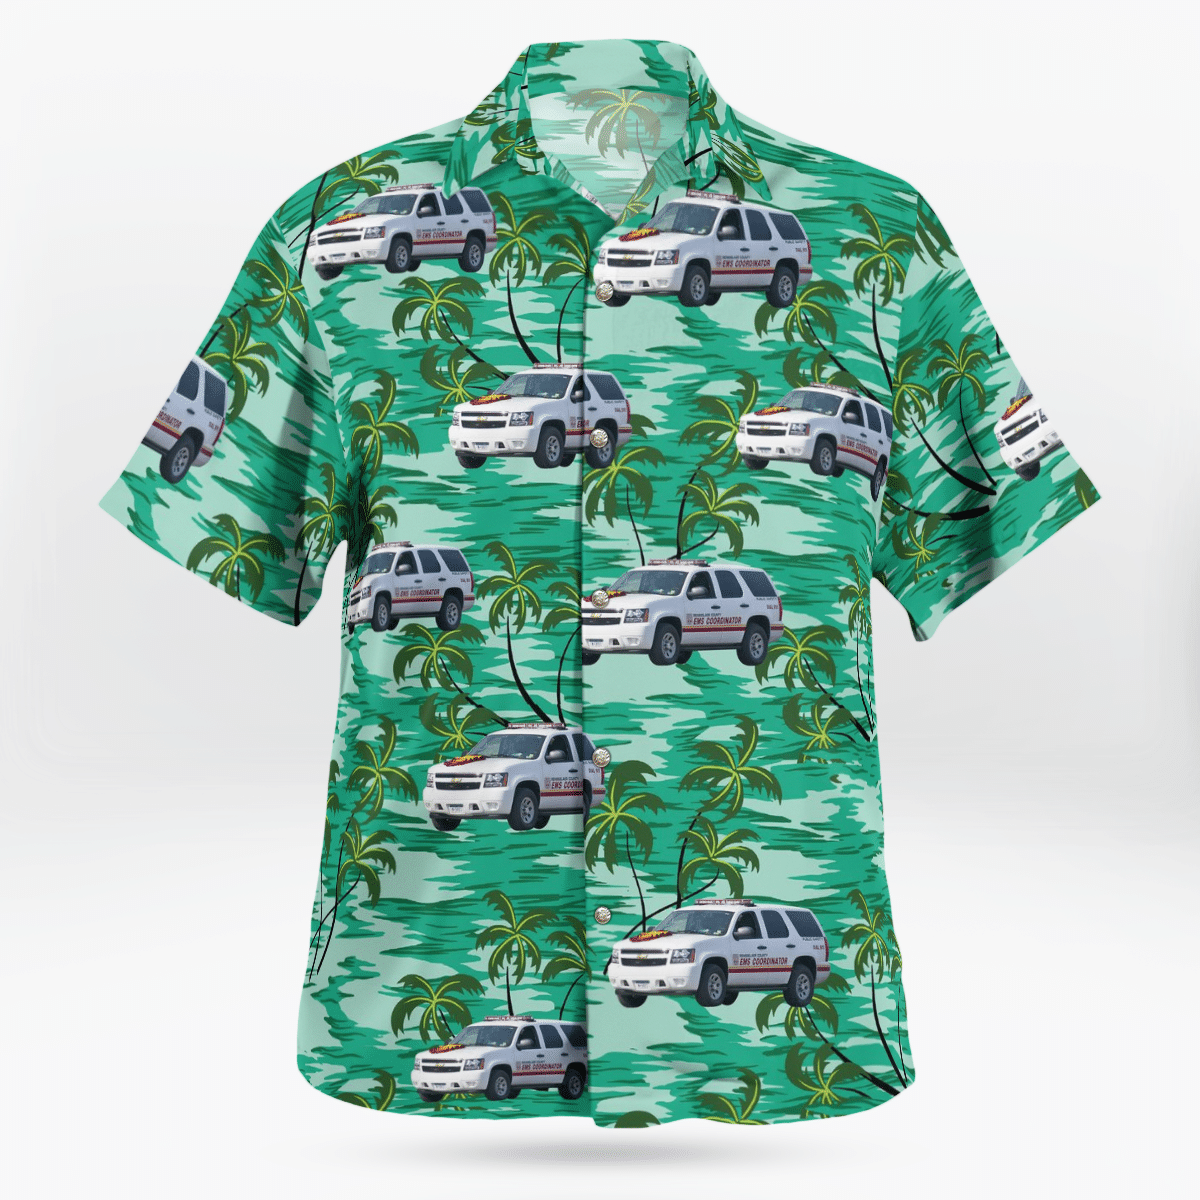 Hawaiian shirts never go out of style 174